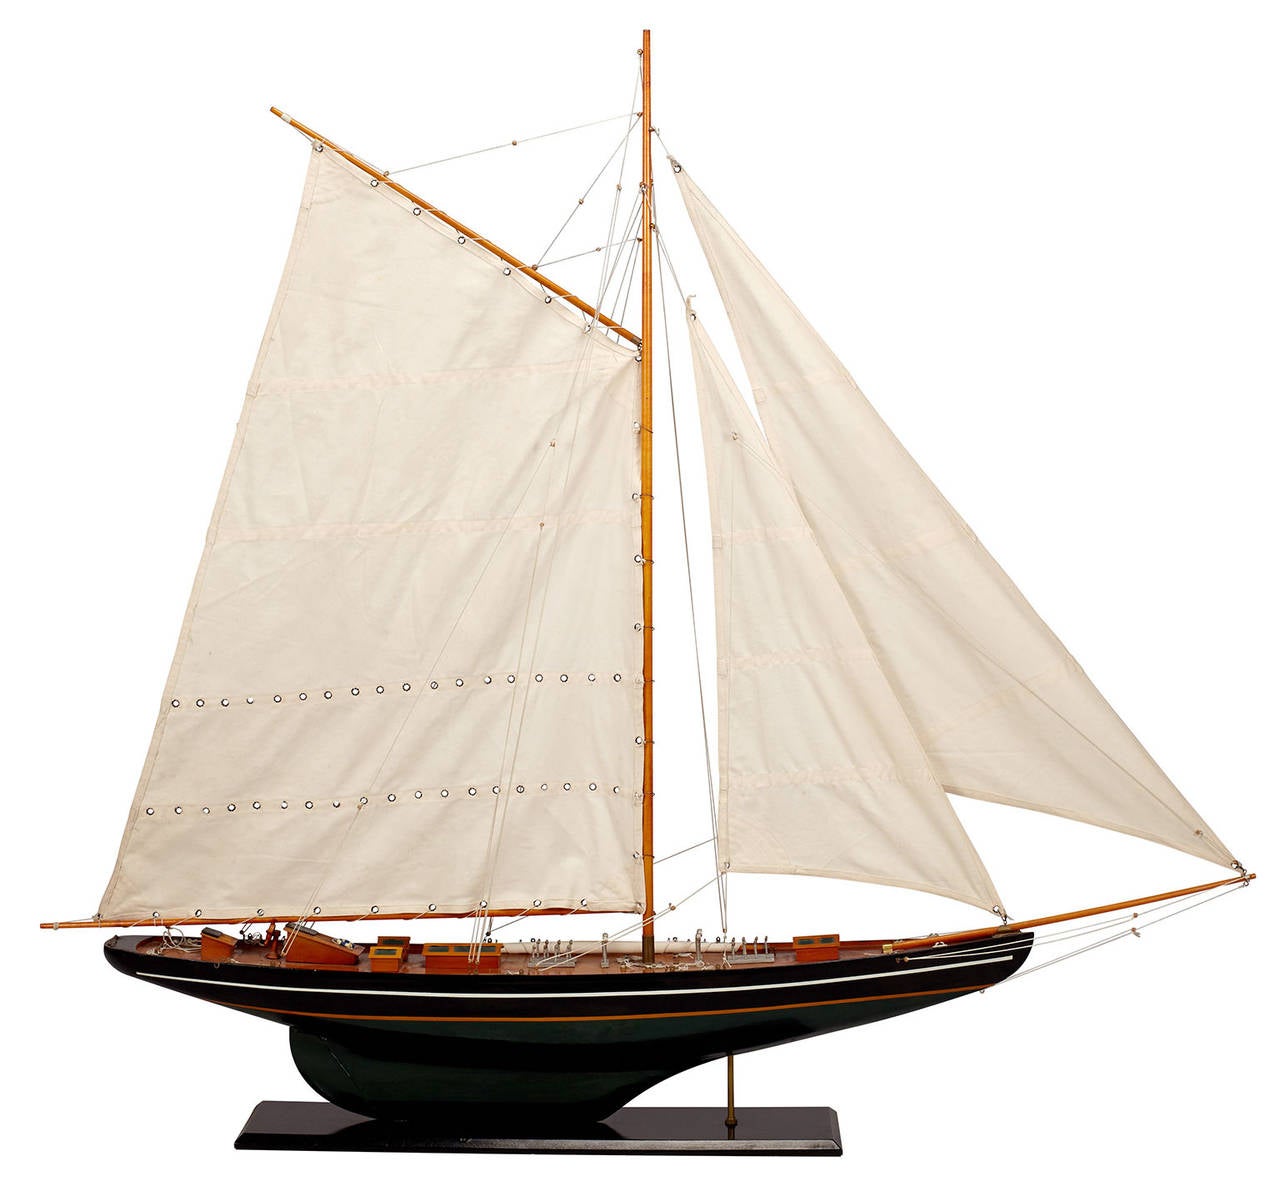 A large model of a sailboat or schooner on a wood stand.